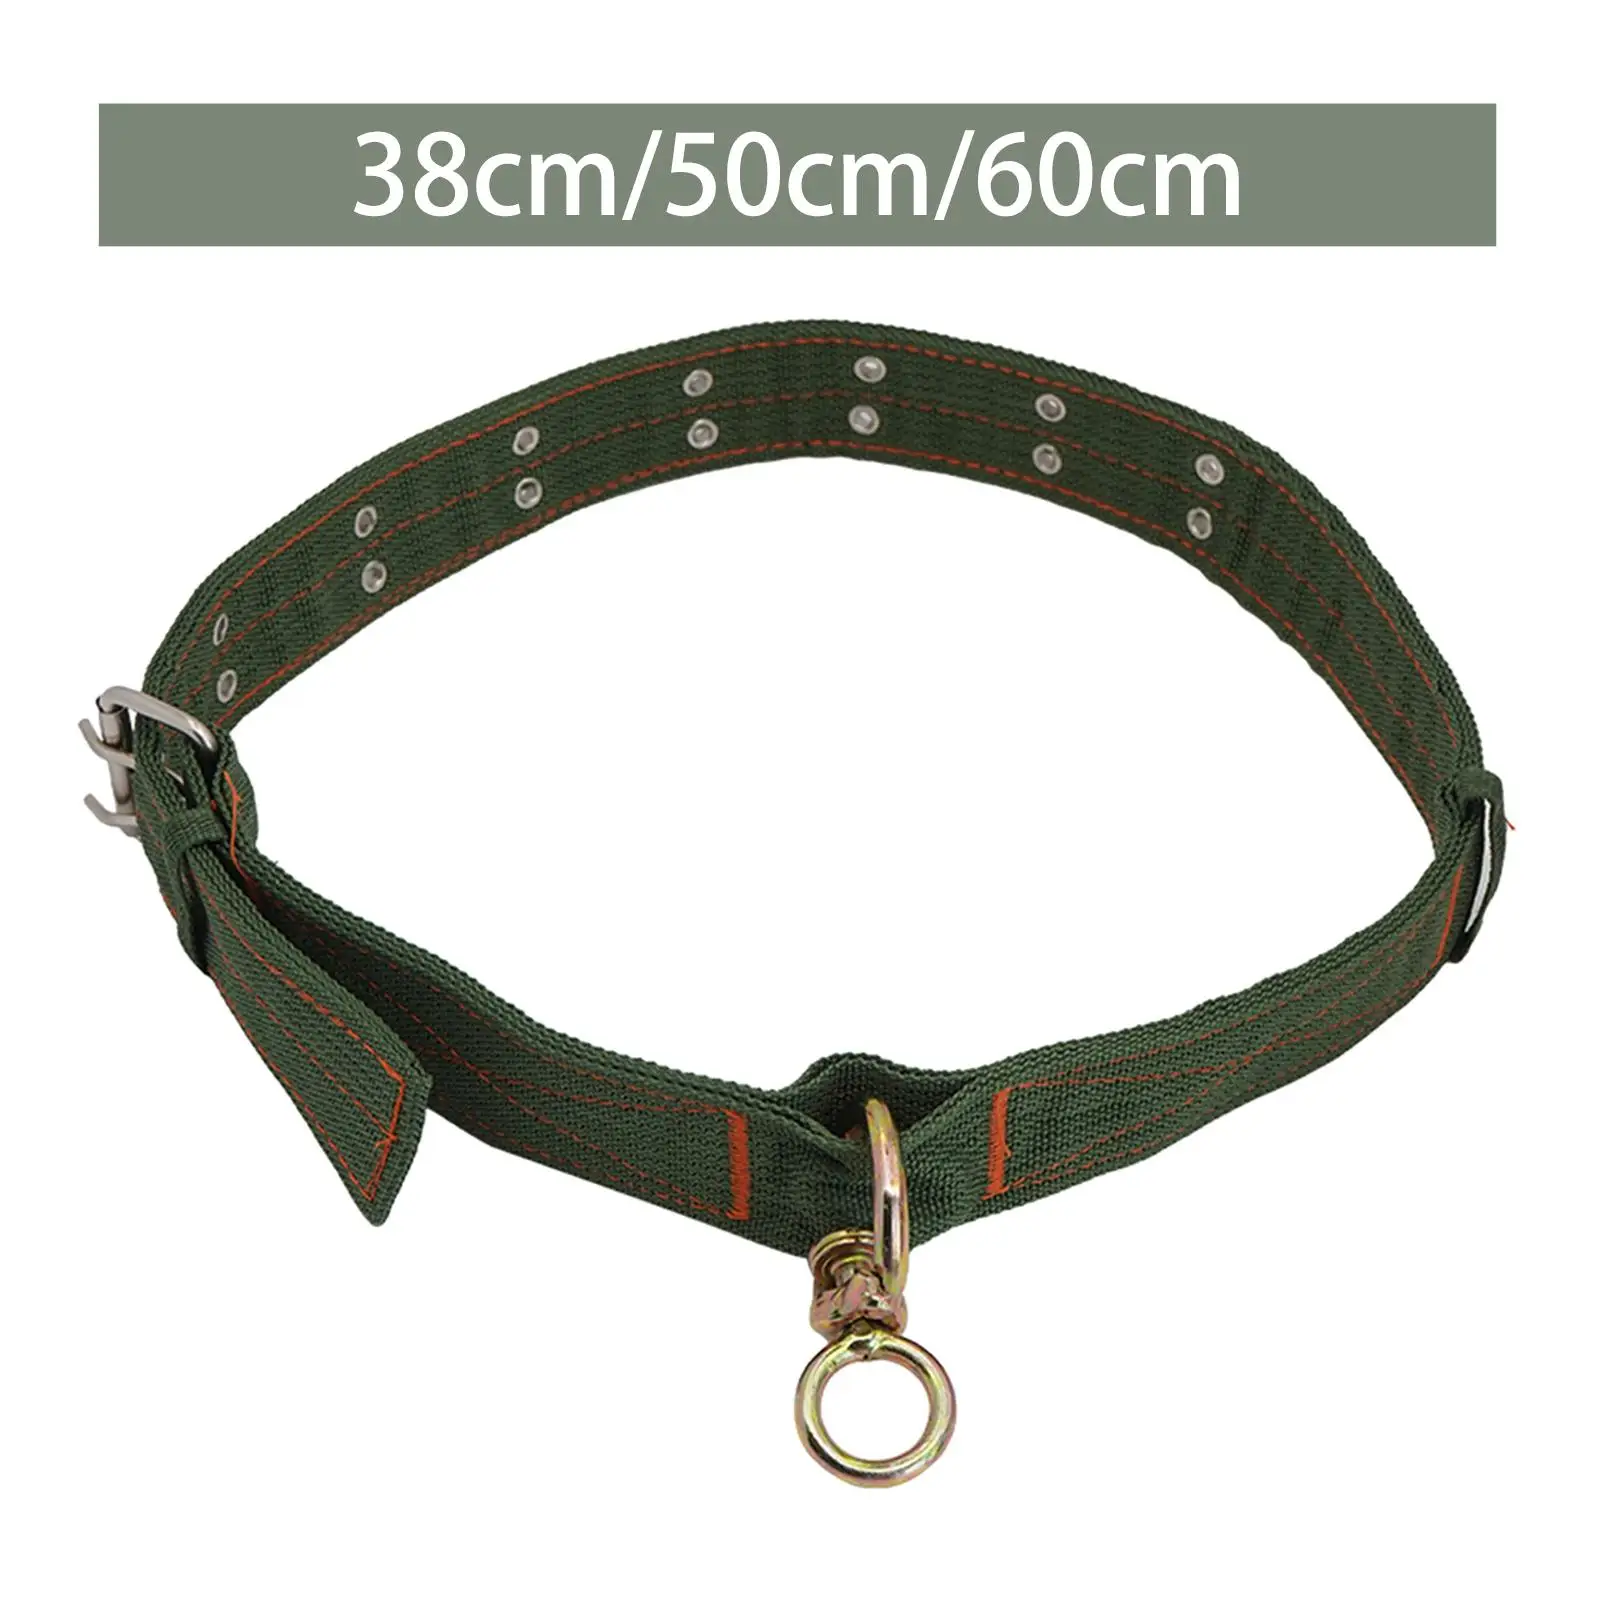 Pets Collar Four Layer Thickened 2 Rows Metal Buckle Traction Chain Sheep Collar Cow Neck Collar for Animals Sheep Pets sheep